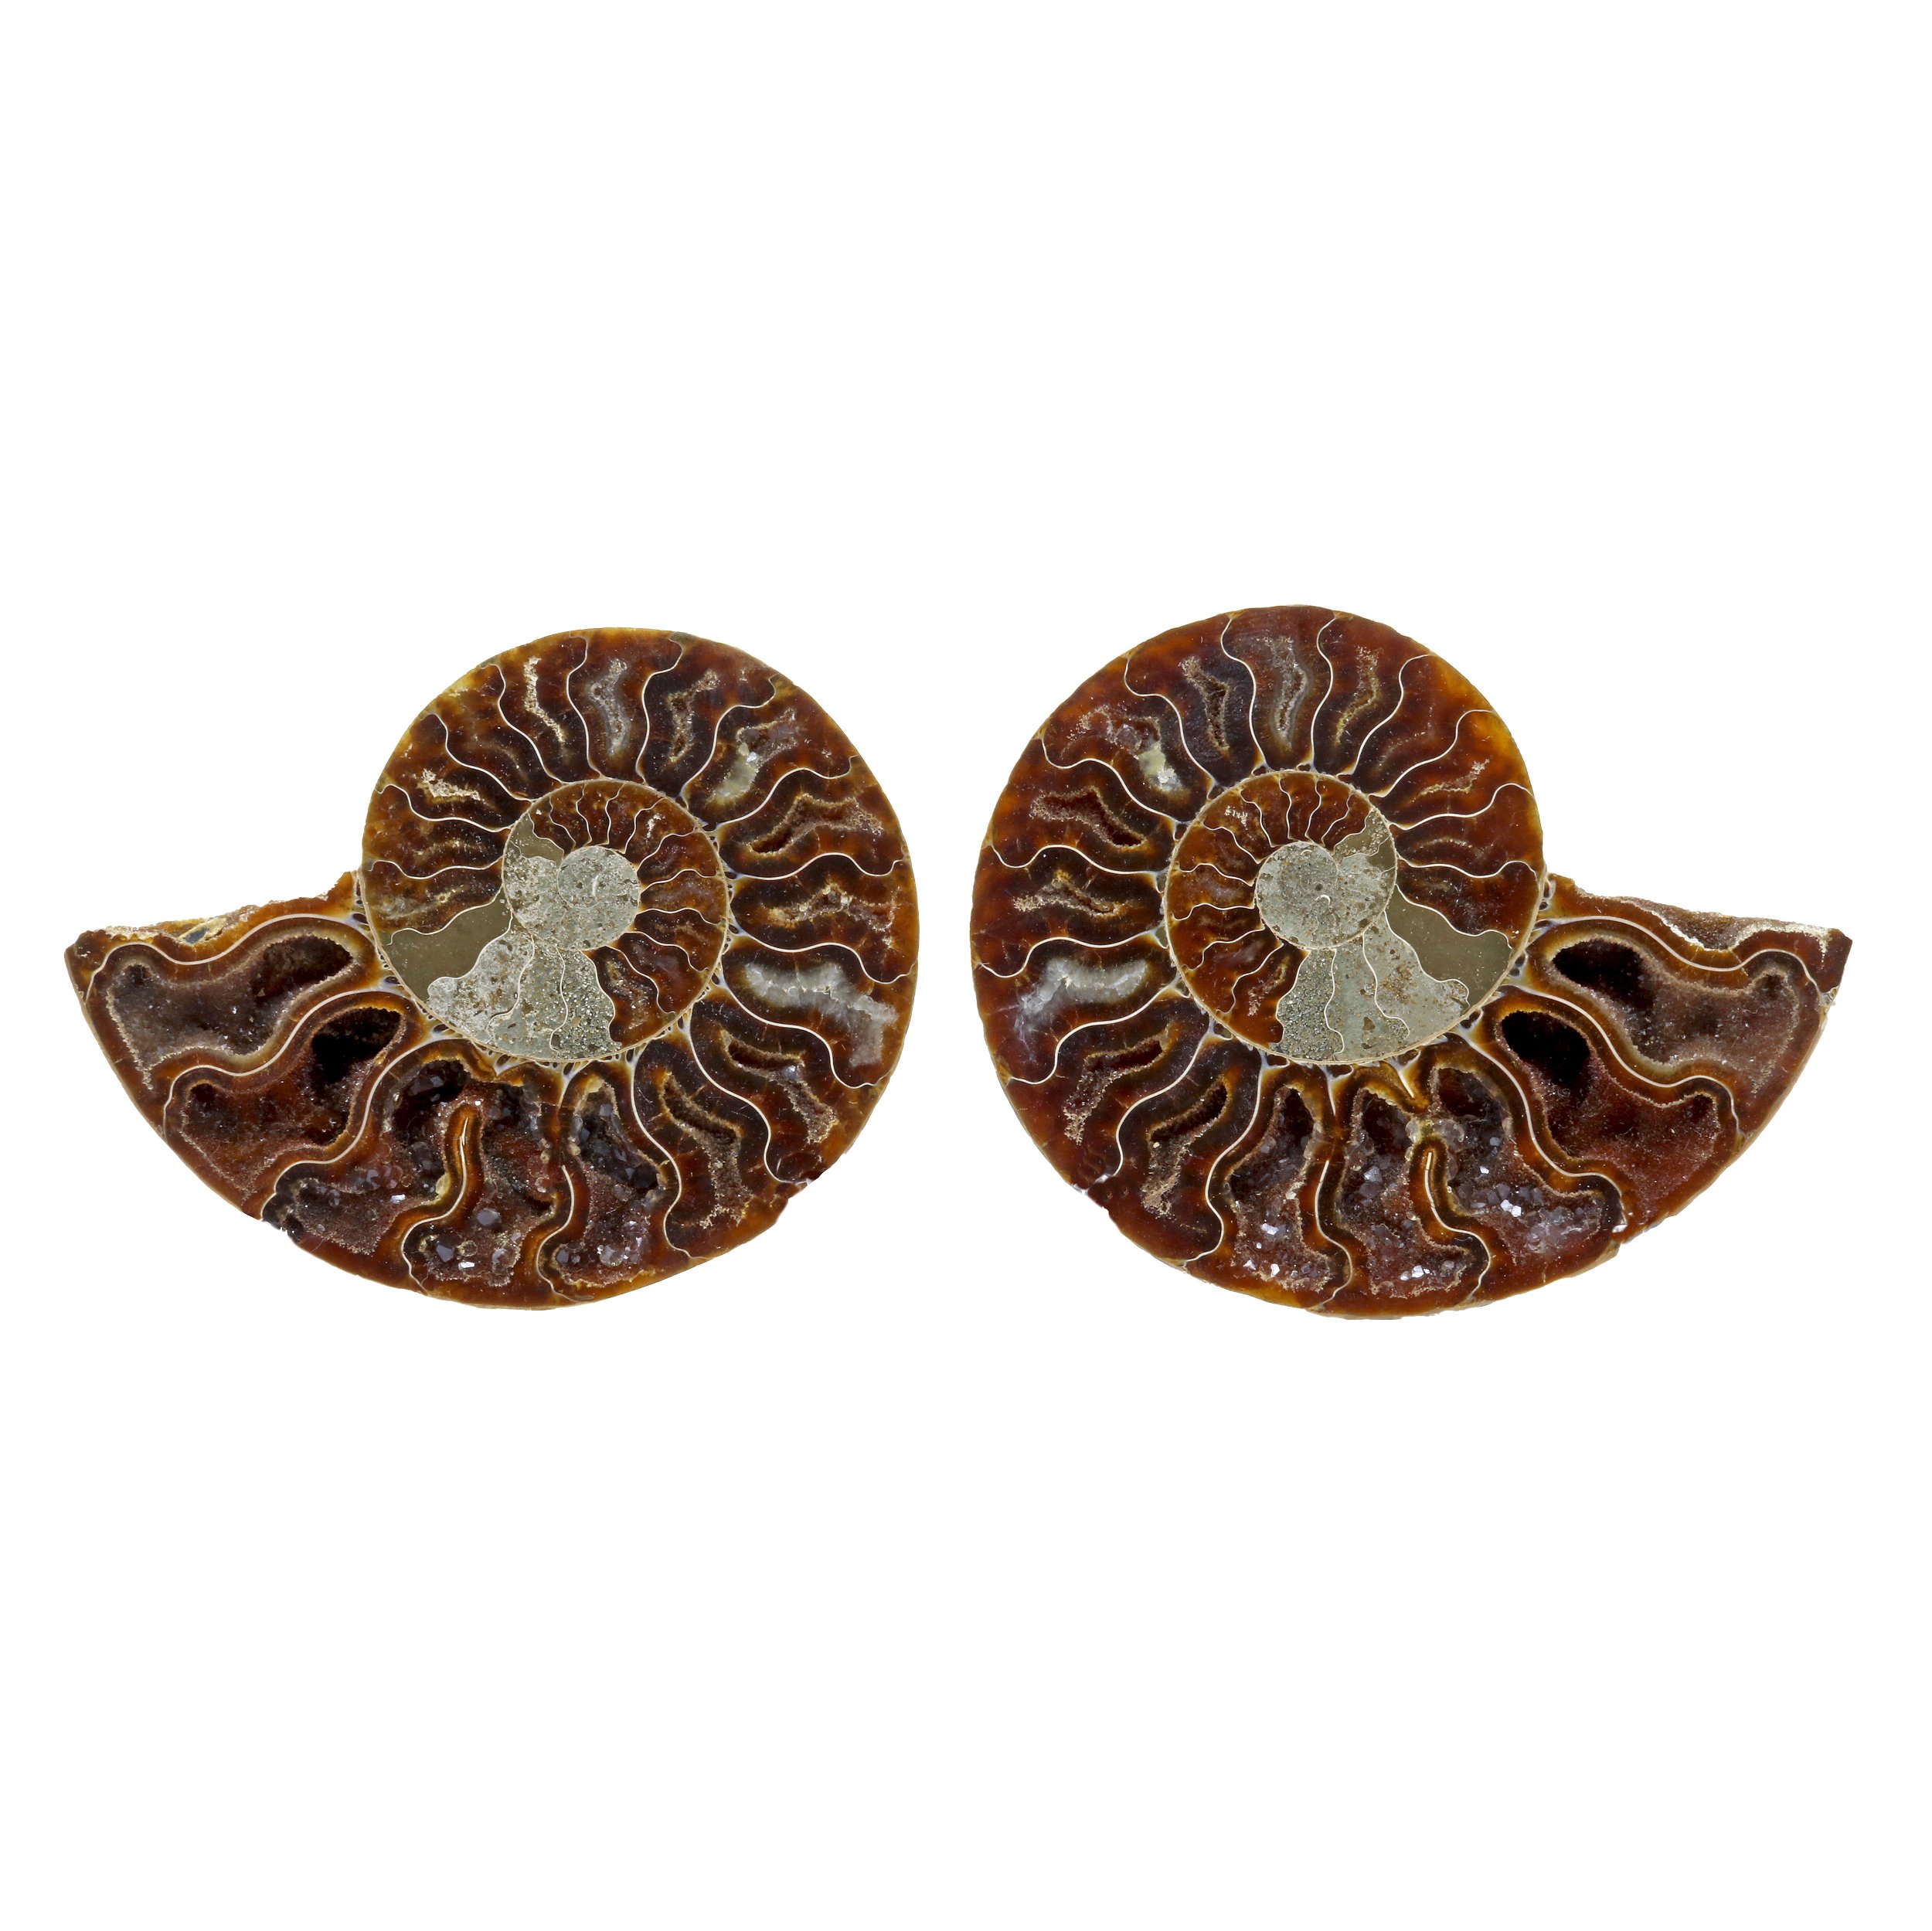 Ammonite Fossil Pair In Acrylic Stands - Dark Calcite Face With Druze Pockets